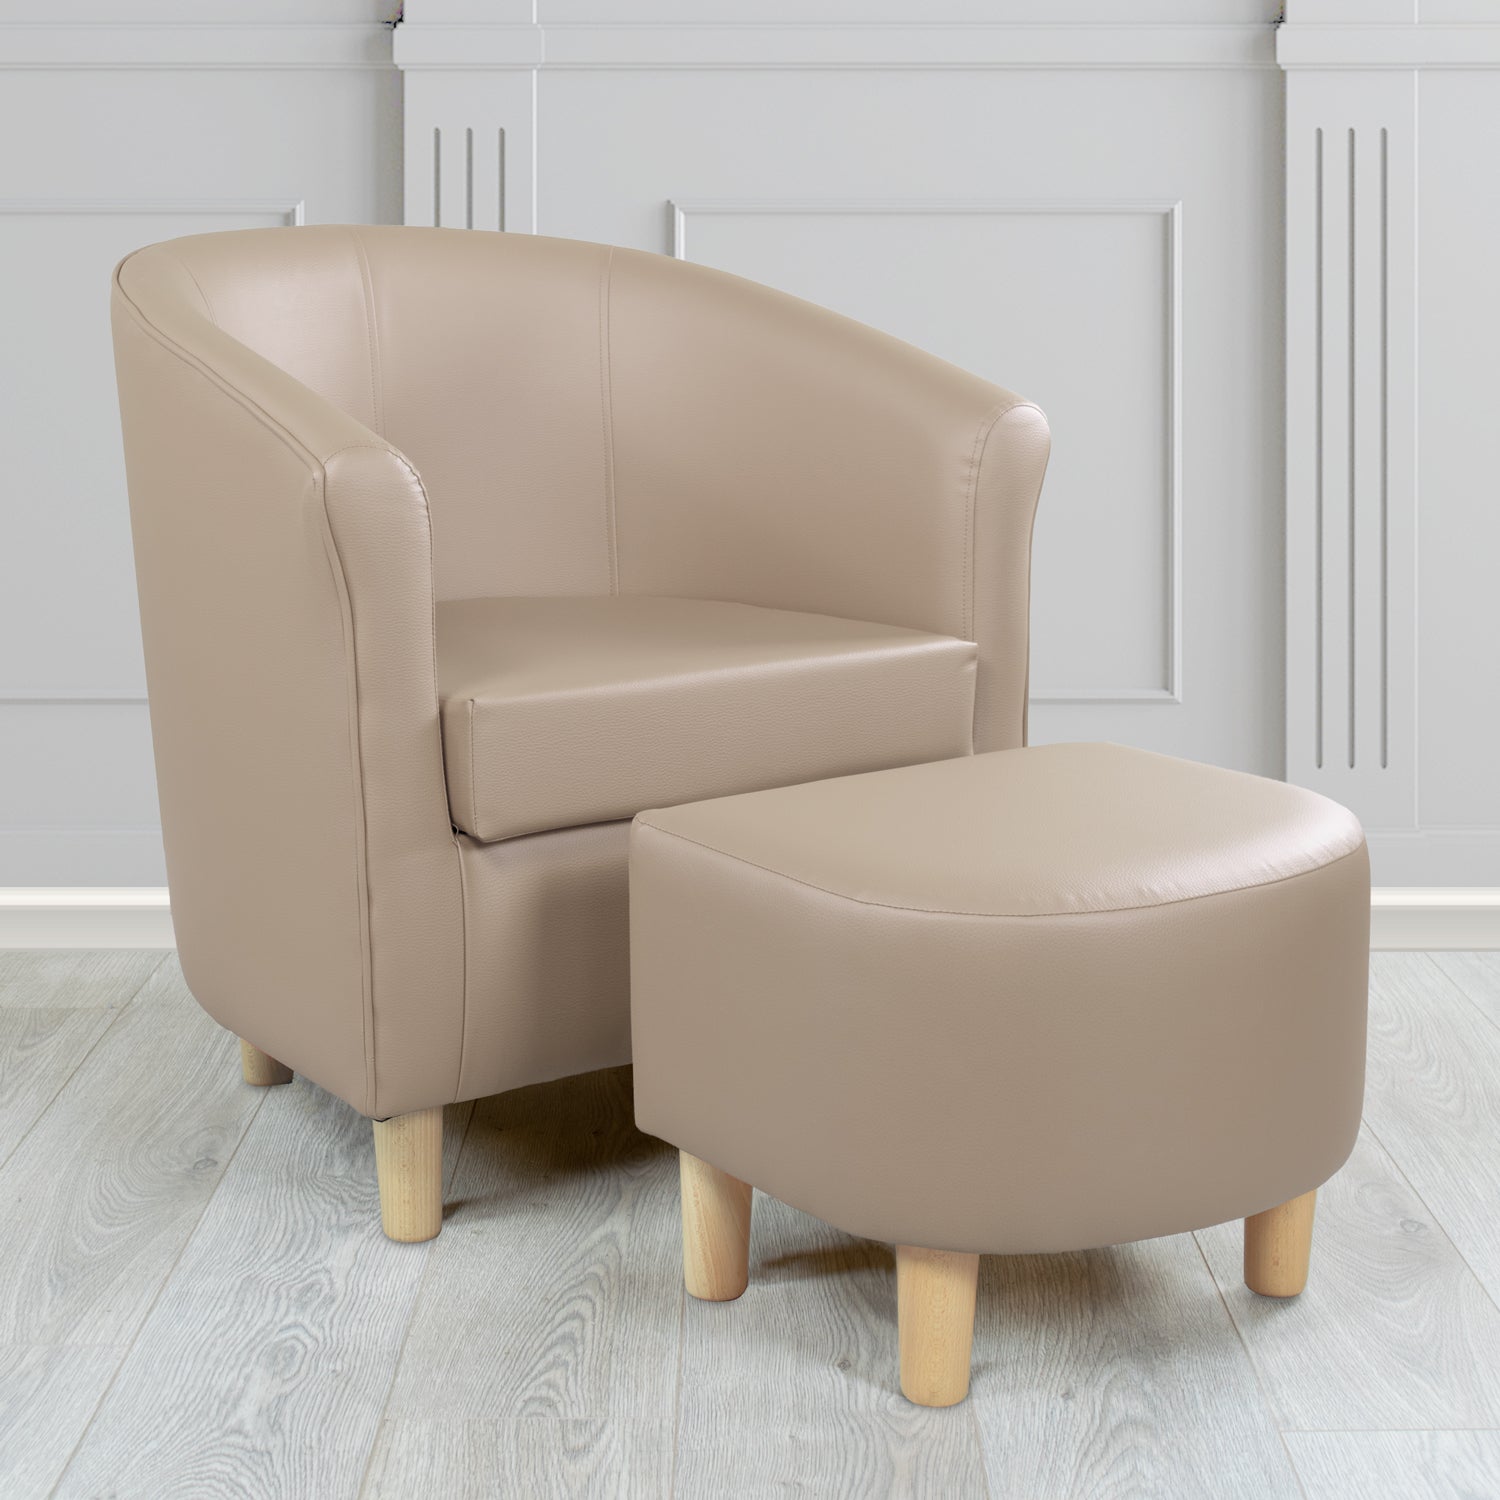 Express Tuscany Taupe DF50 Faux Leather Tub Chair with Footstool Set (6541306396714)